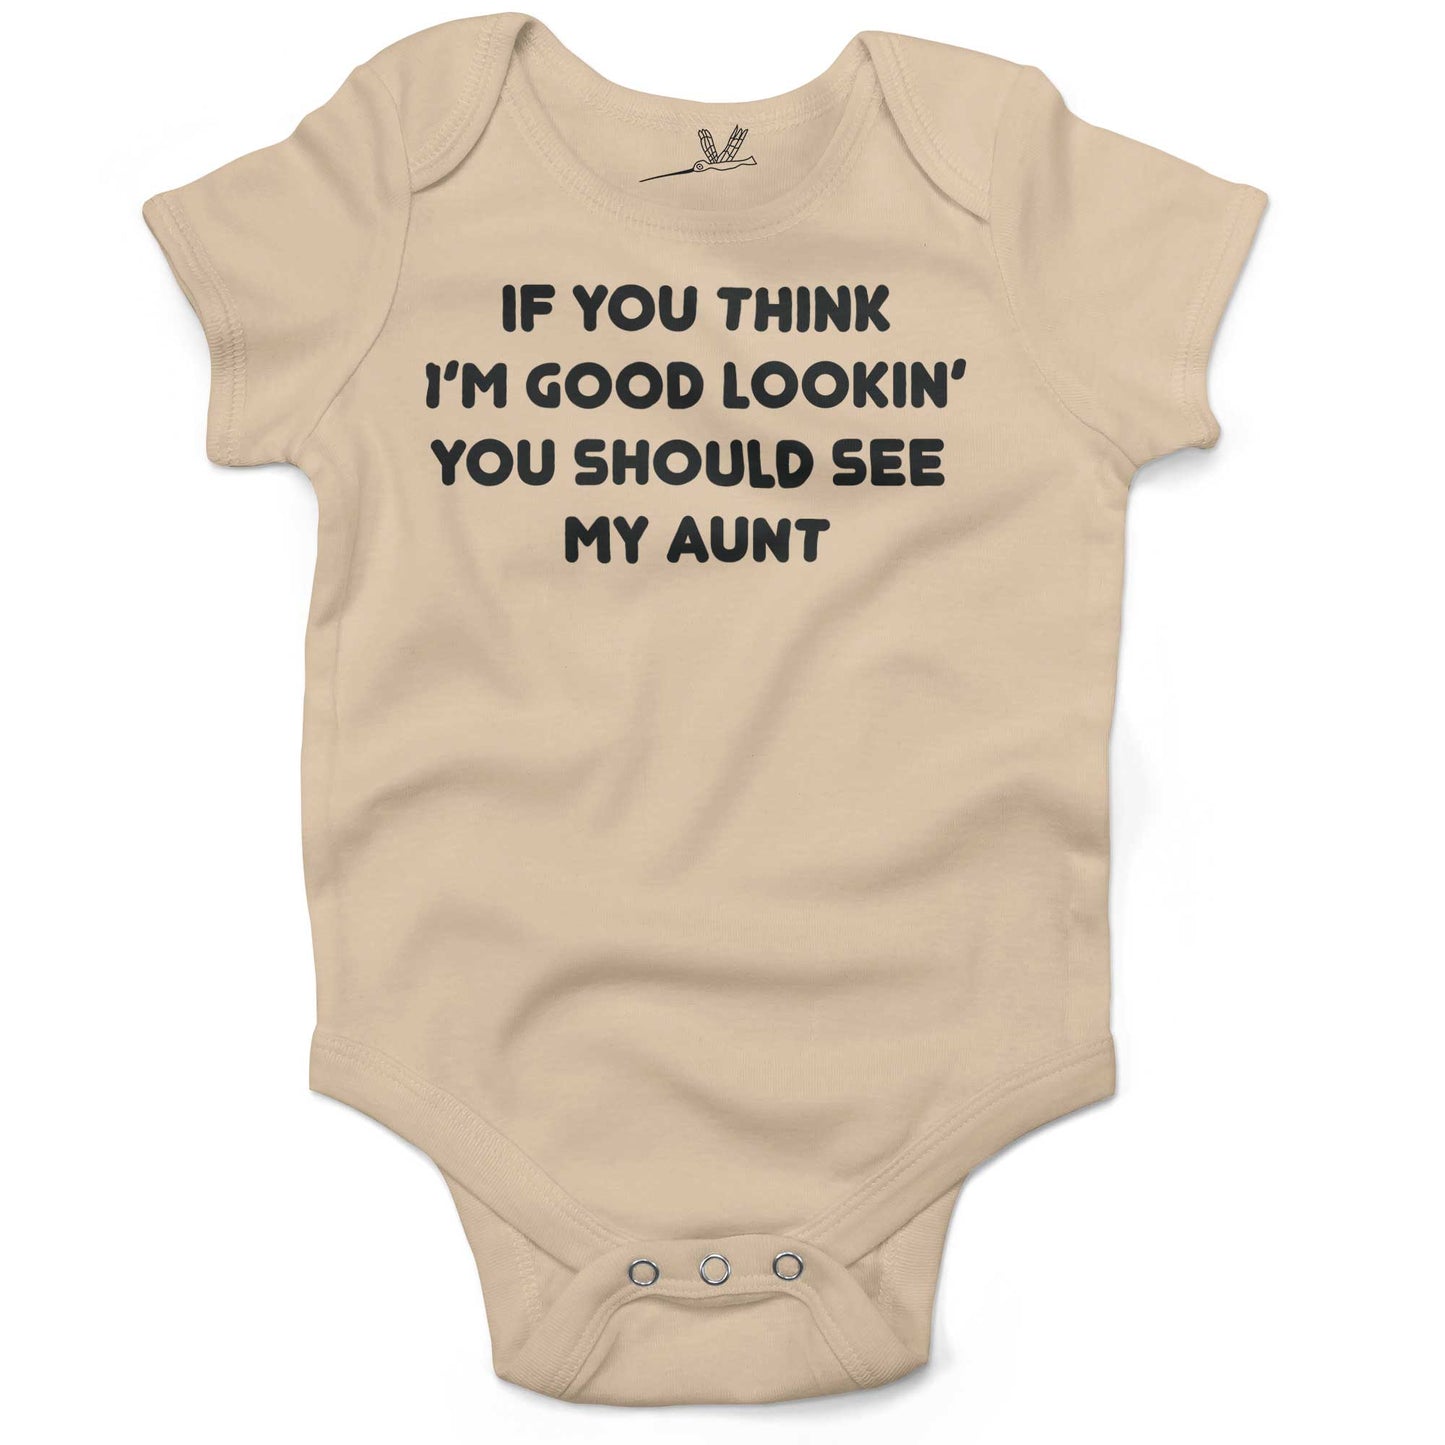 If You Think I'm Good Lookin' You Should See My Aunt Infant Bodysuit or Raglan Tee-Organic Natural-3-6 months